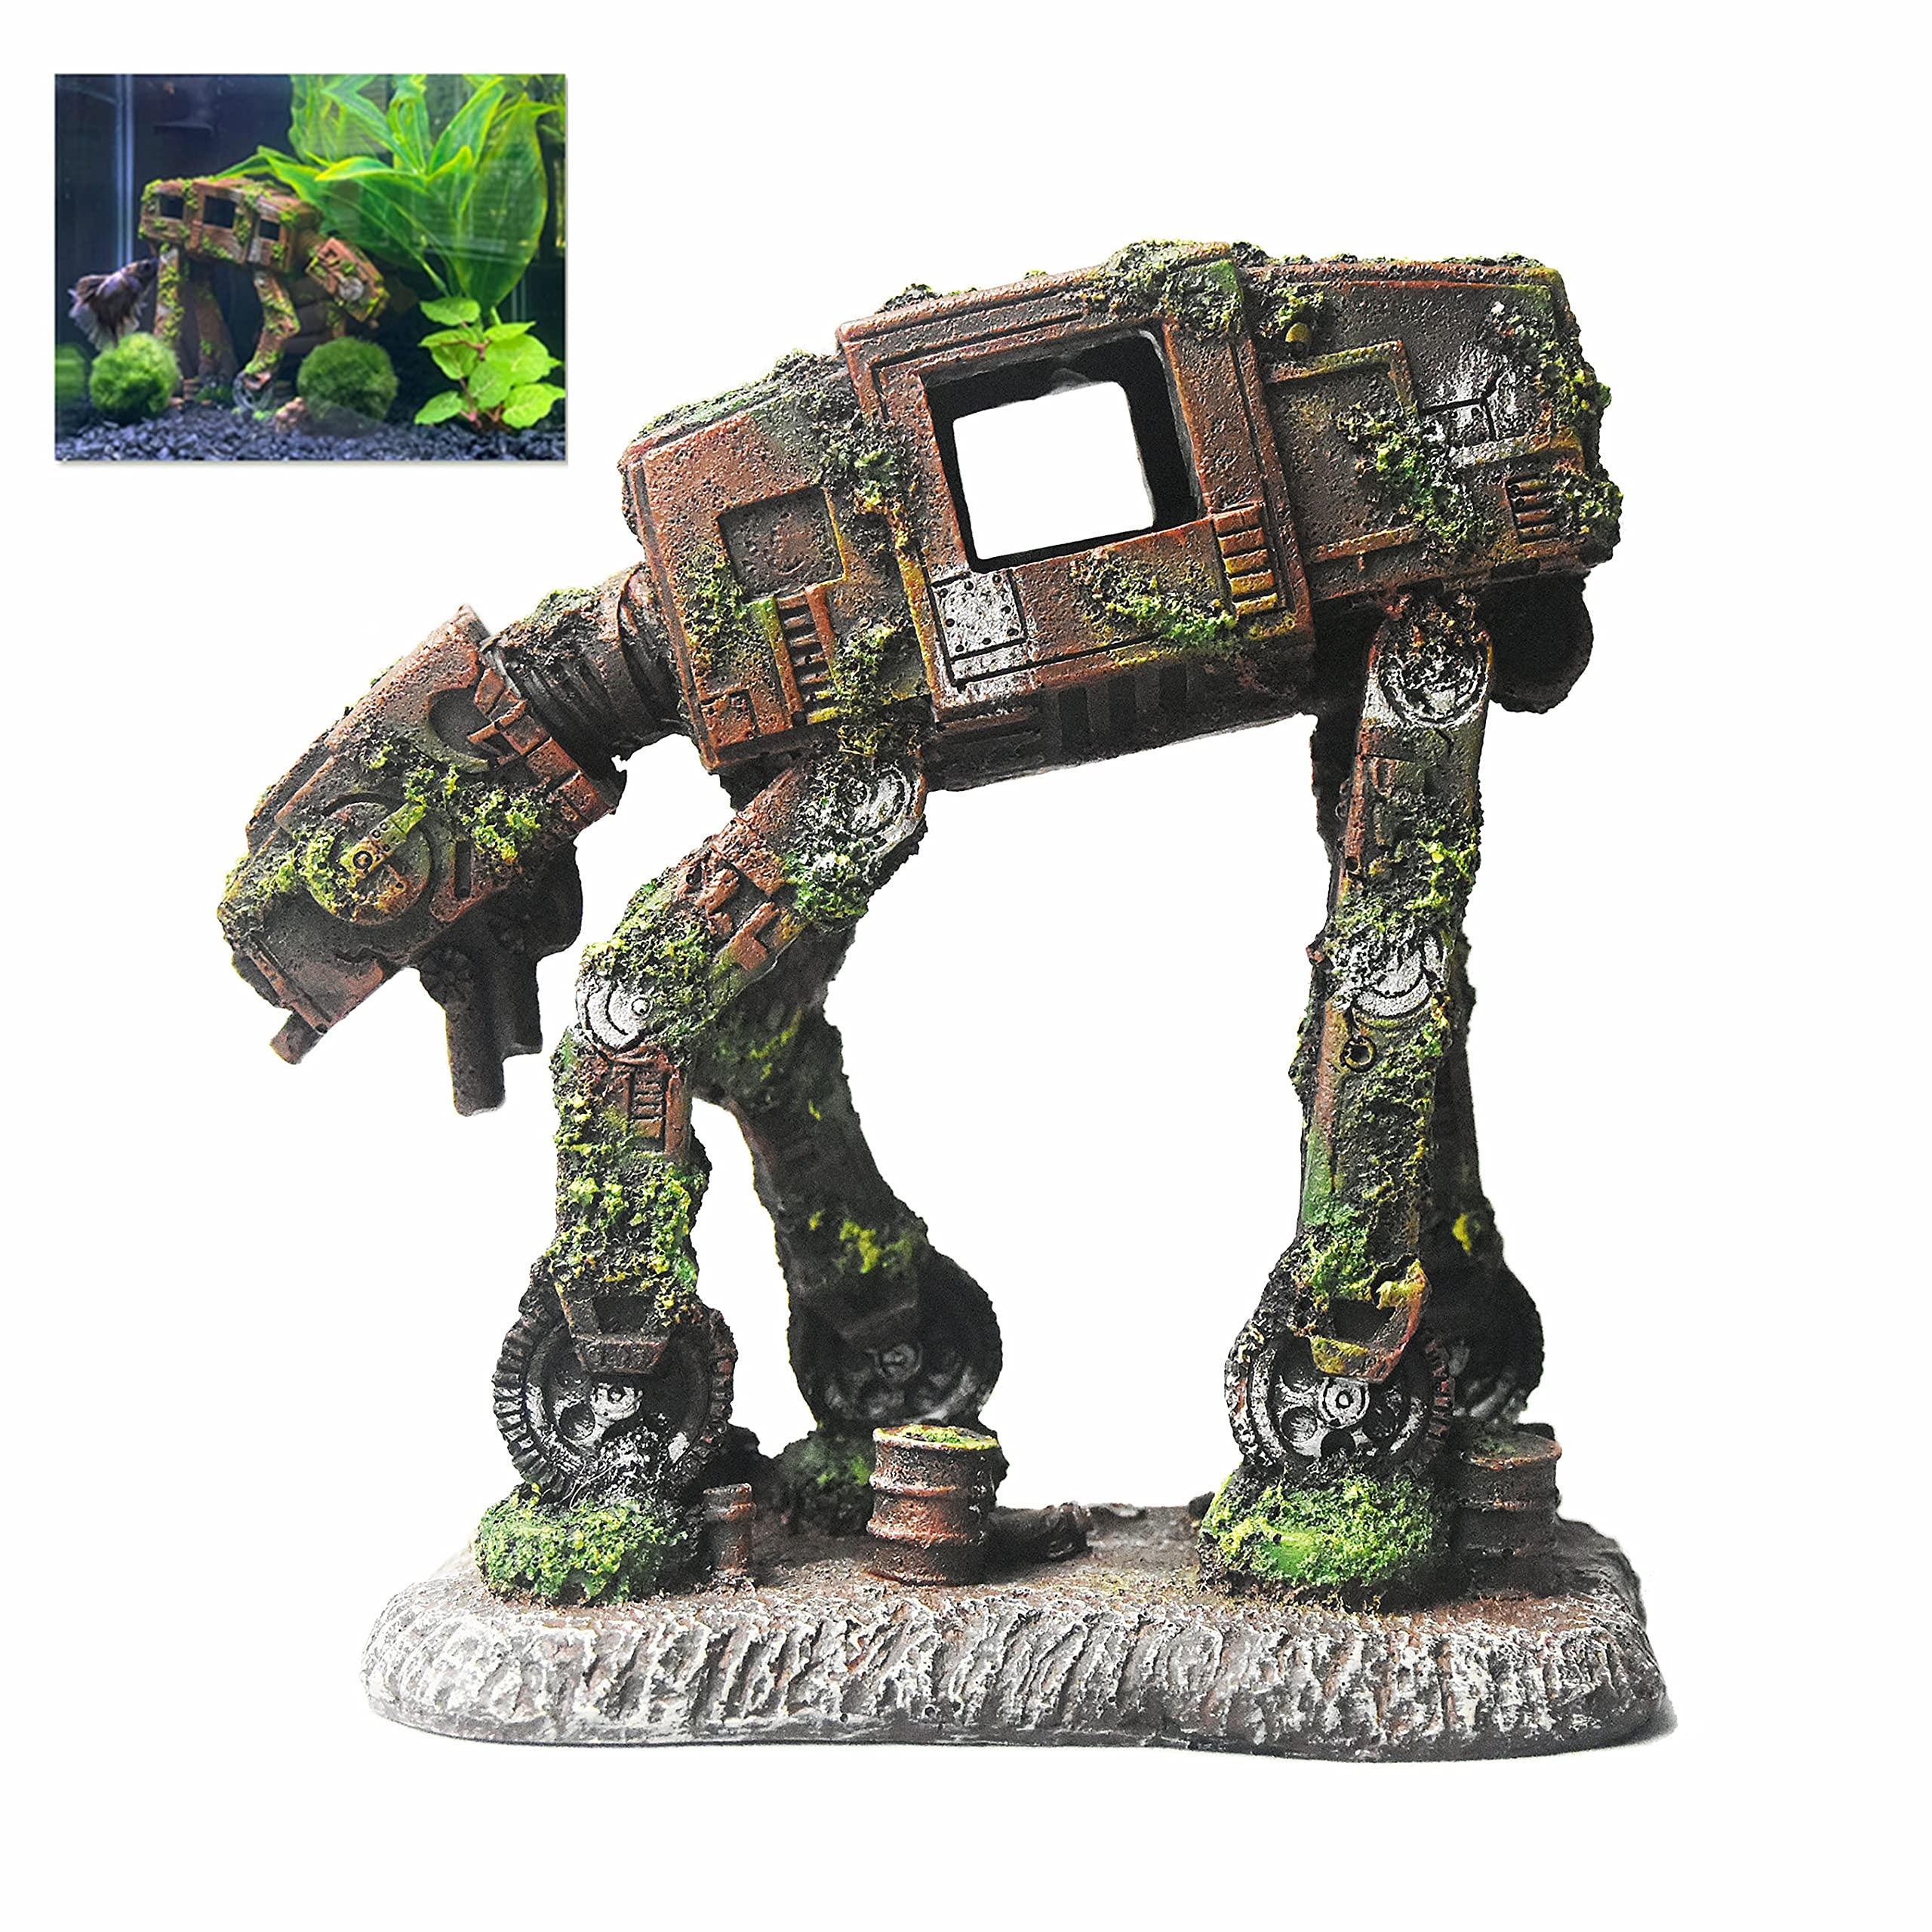 fazhongfa Aquarium Decorations castle and Robot Dog Fish Tank Decor for Betta Toys Small and Medium Resin Fish Accessories Hideouts cave Hide House Ornament Backgrounds Decoration